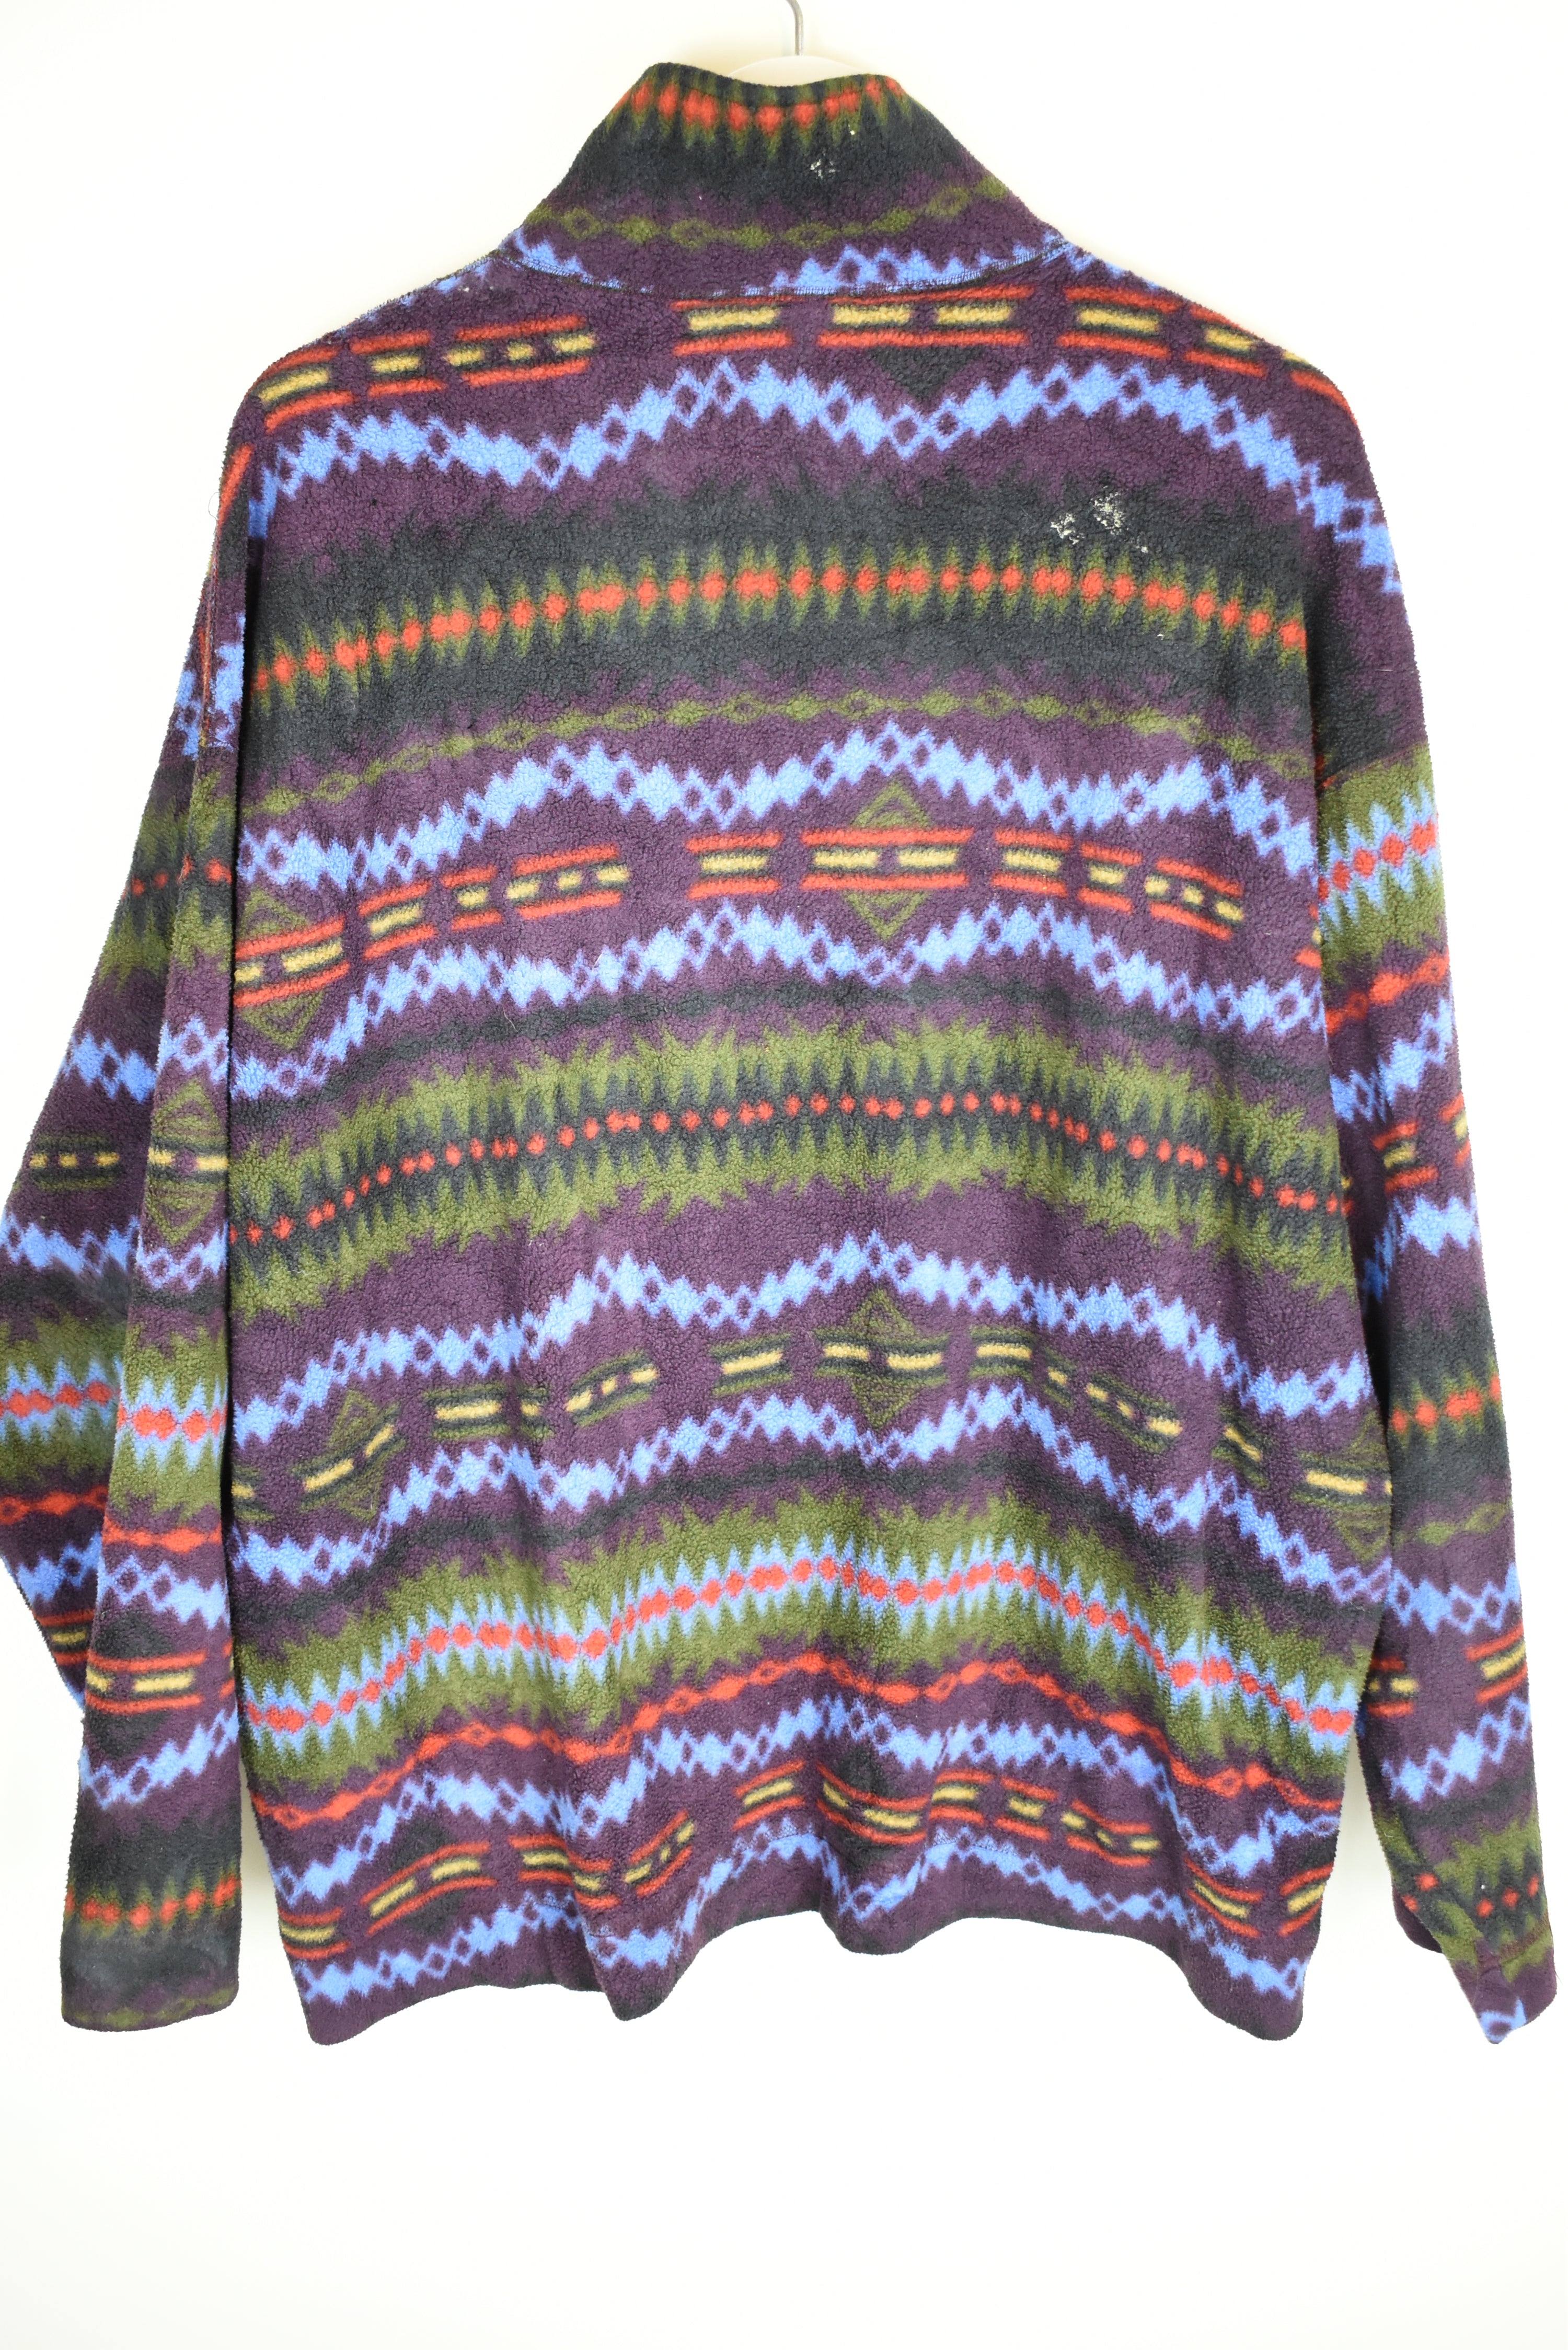 Vintage 90's Patagonia Printed Synchilla Shearling Sweater Fleece XL | Vintage Clothing